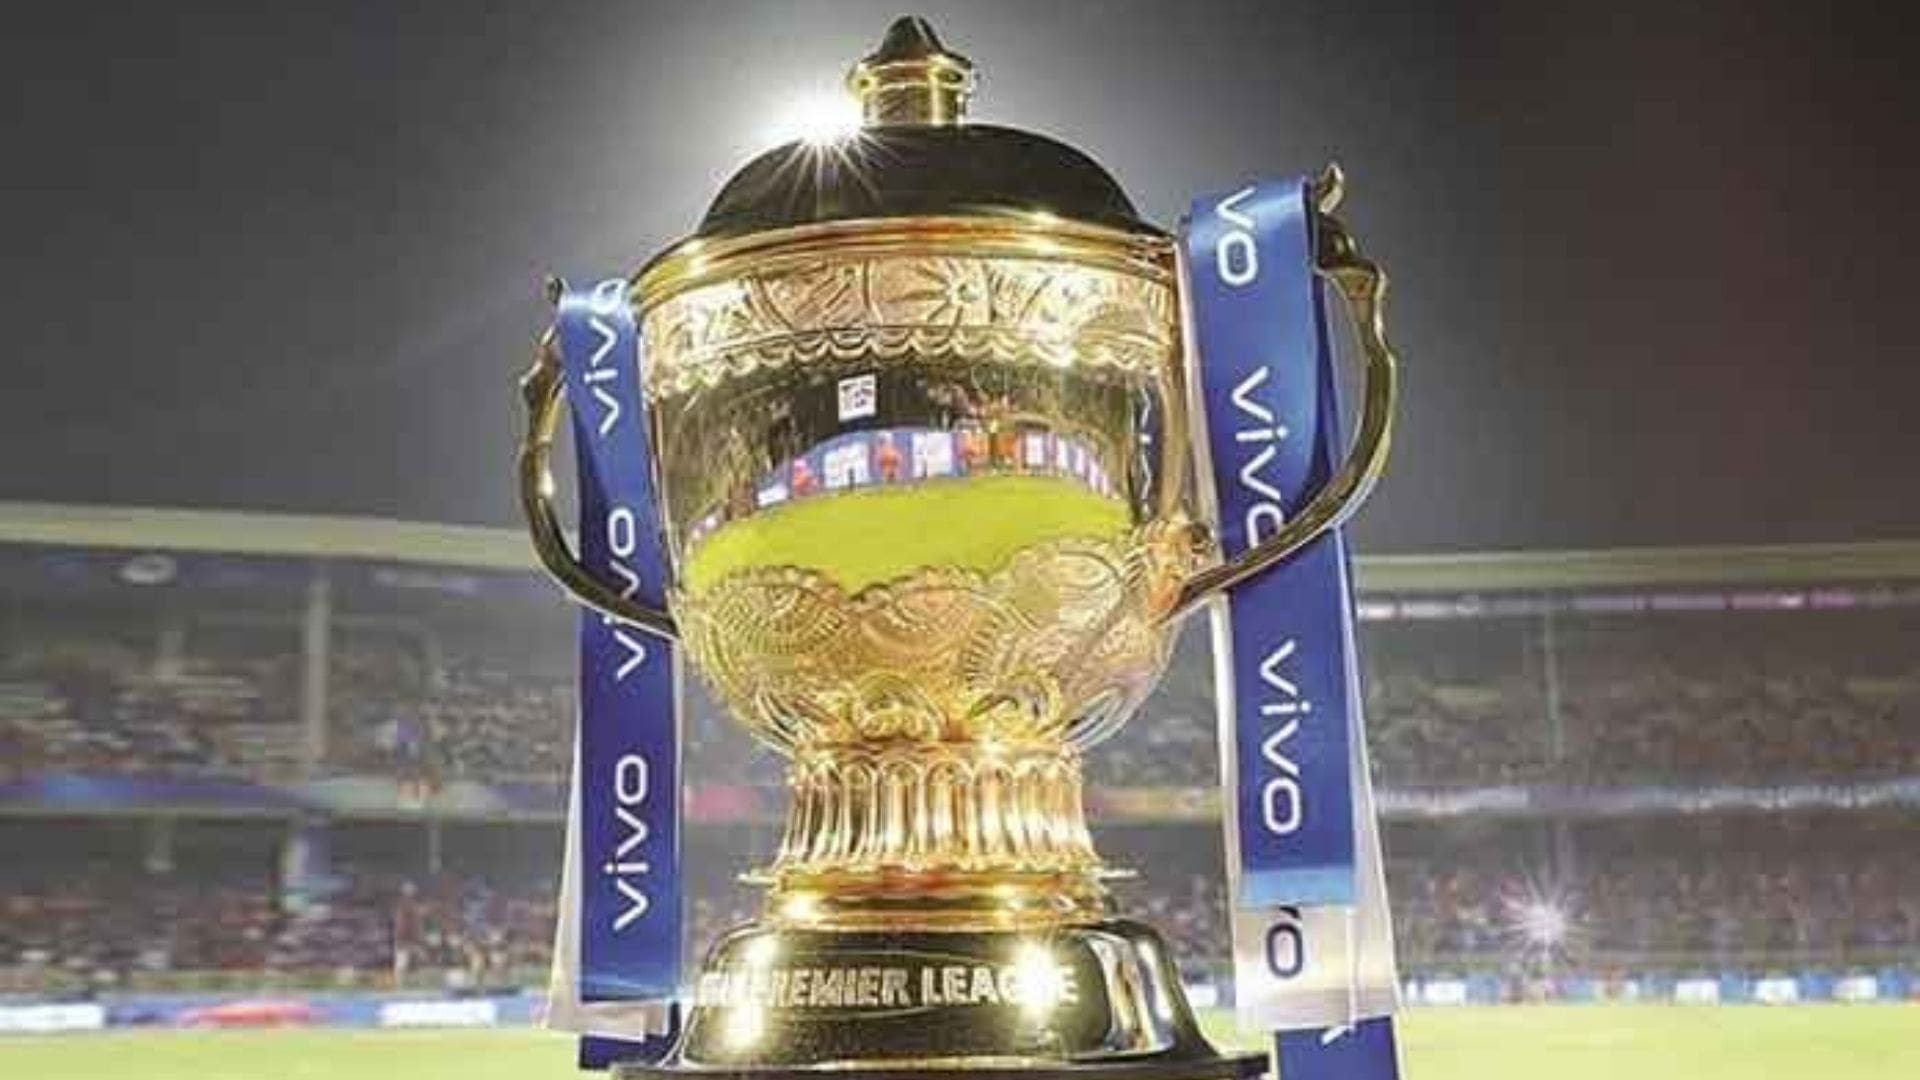 IPL 2021: Earlier, BCCI’s interim chief executive officer Hemang Amin reassured all the officials and players arrangement will be made for their transport back home